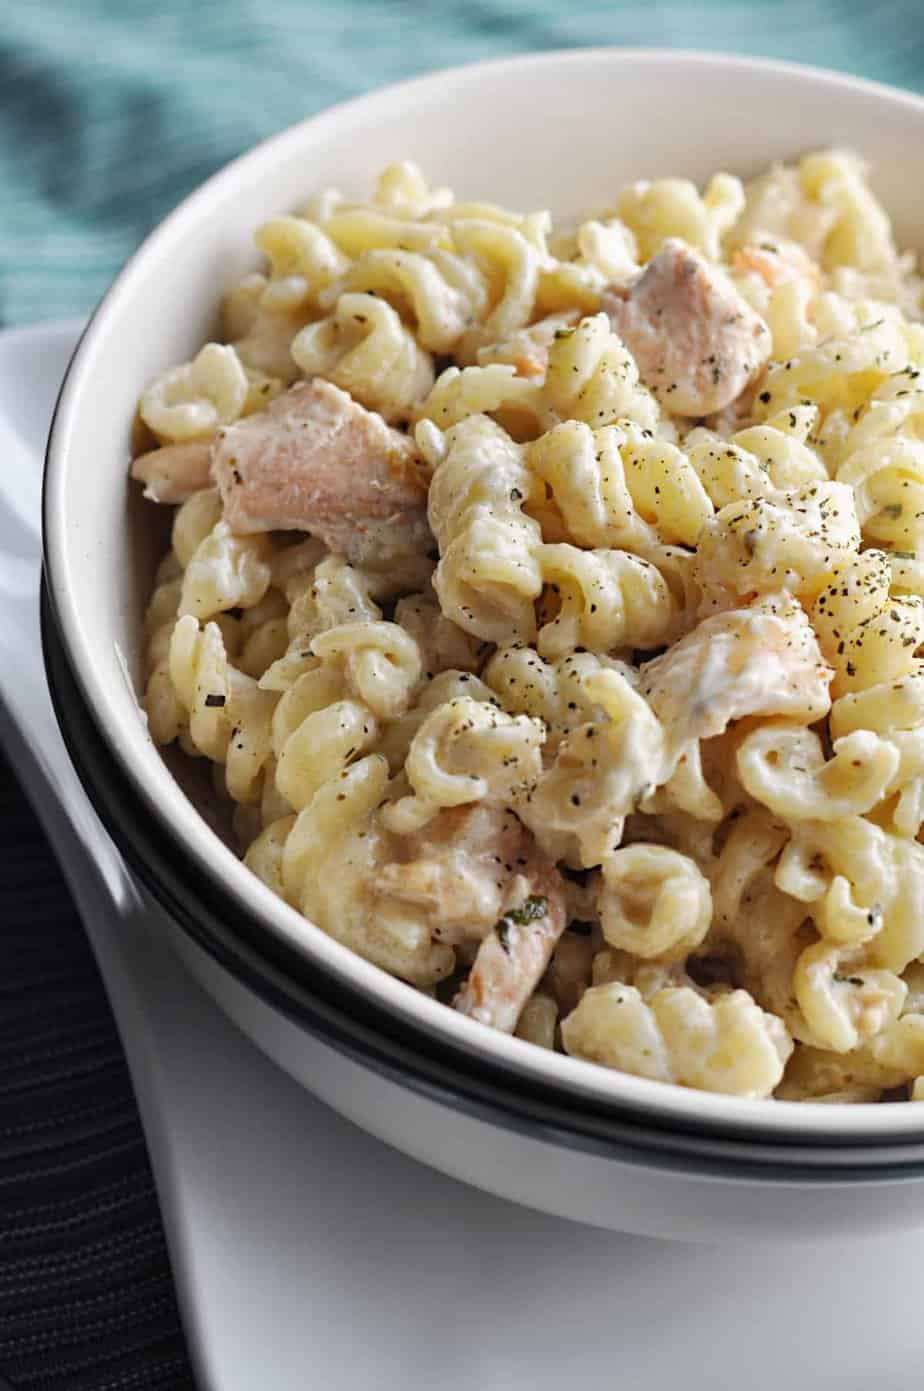 Creamy salmon and shrimp with pasta recipe in bowl.